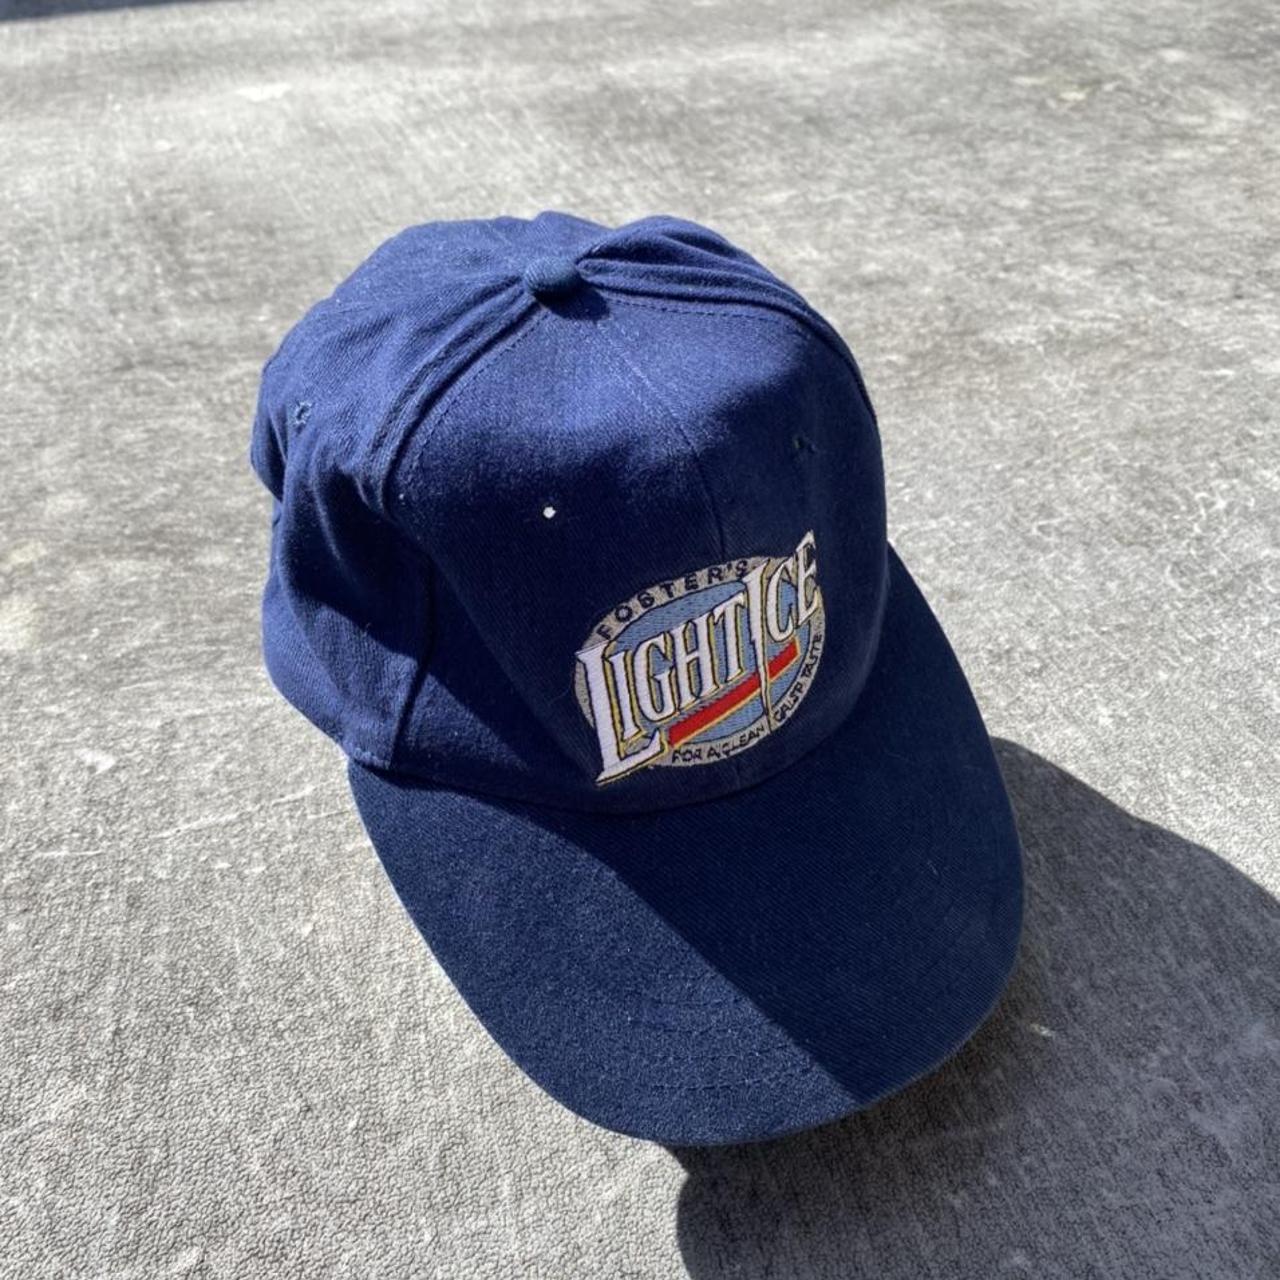 Vintage Fosters Lager cap Super good condition and... - Depop